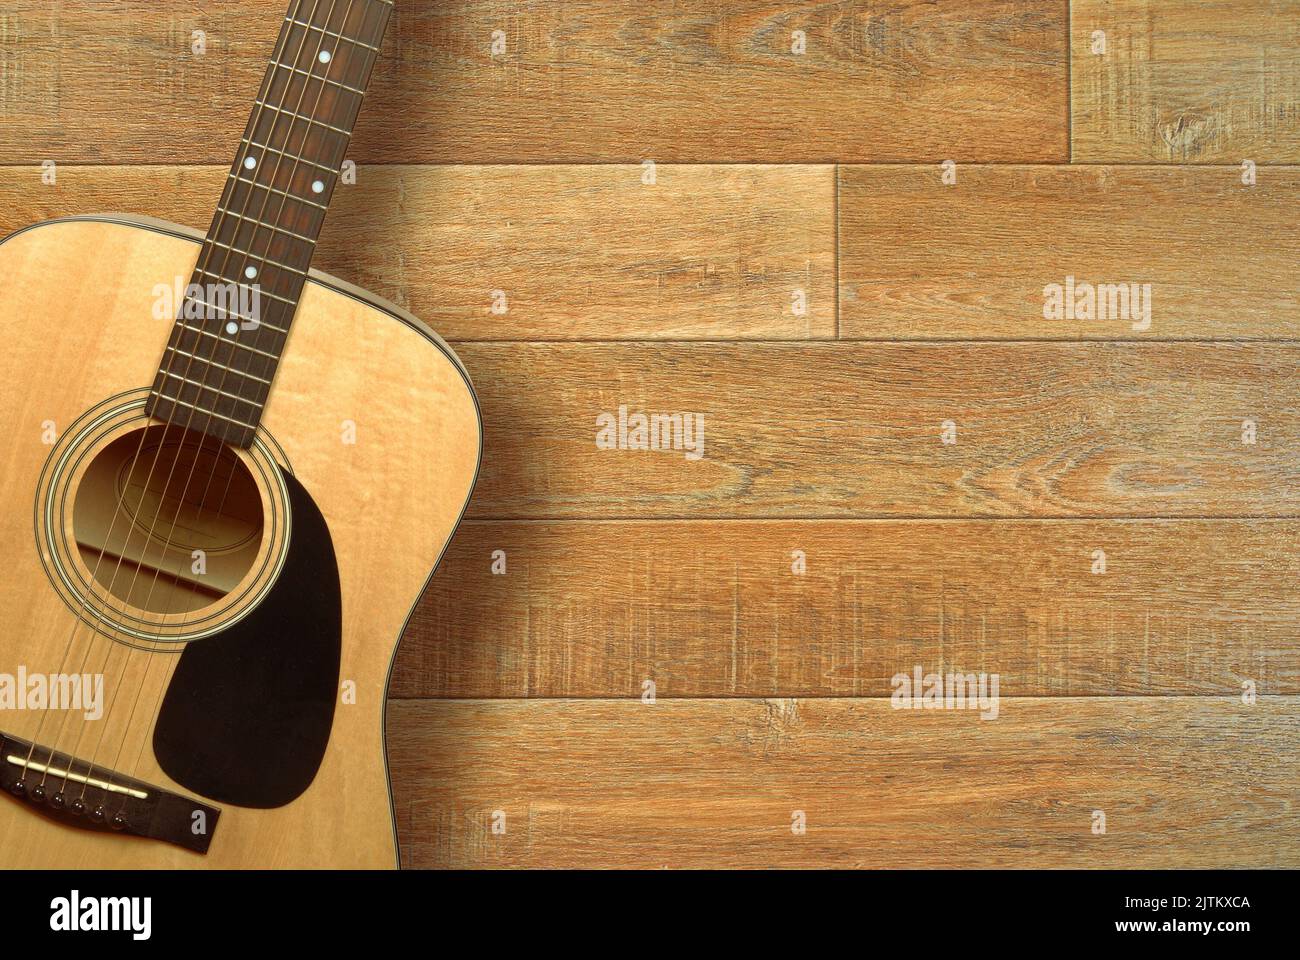 Close up of an acoustic guitar on a wooden floor, shot from above with copy space Stock Photo